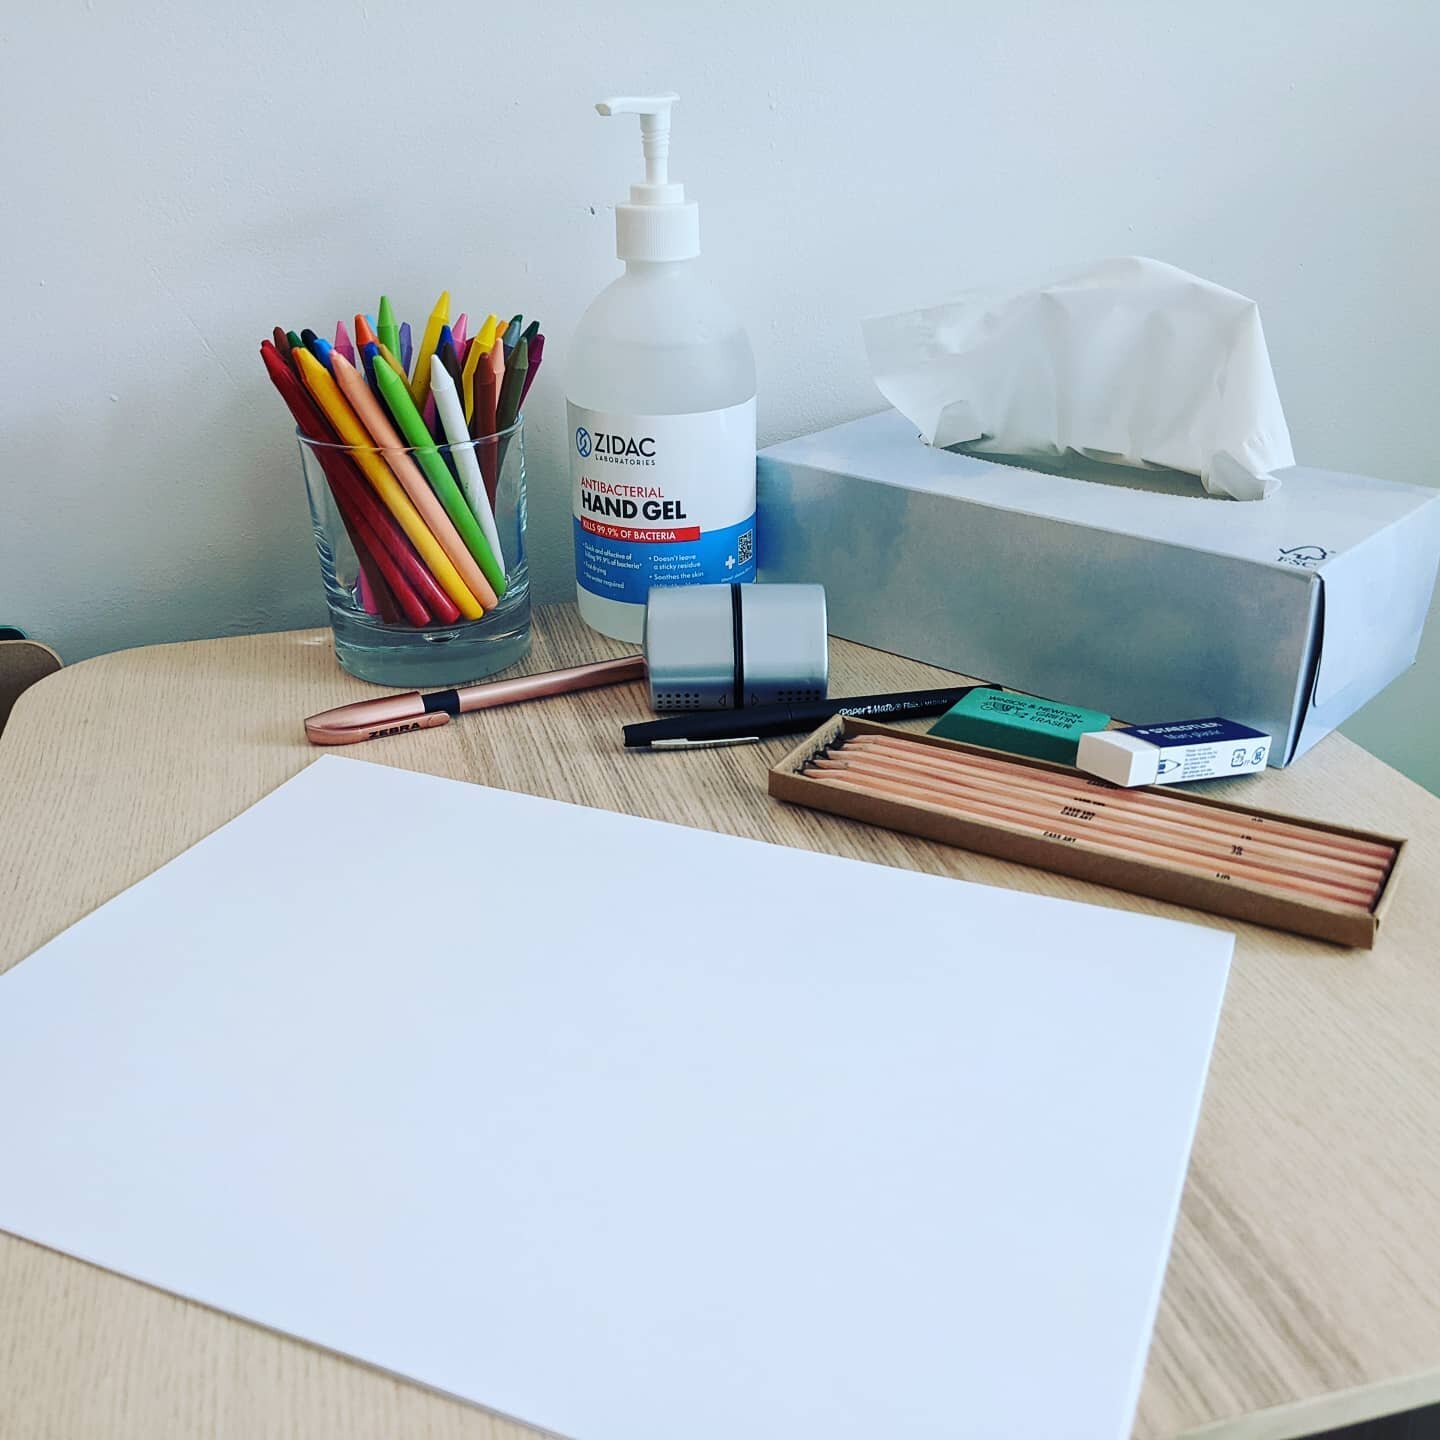 Setting up for some creative work with a client this afternoon. Sometimes drawing is better than talking! #counselling #creativeart